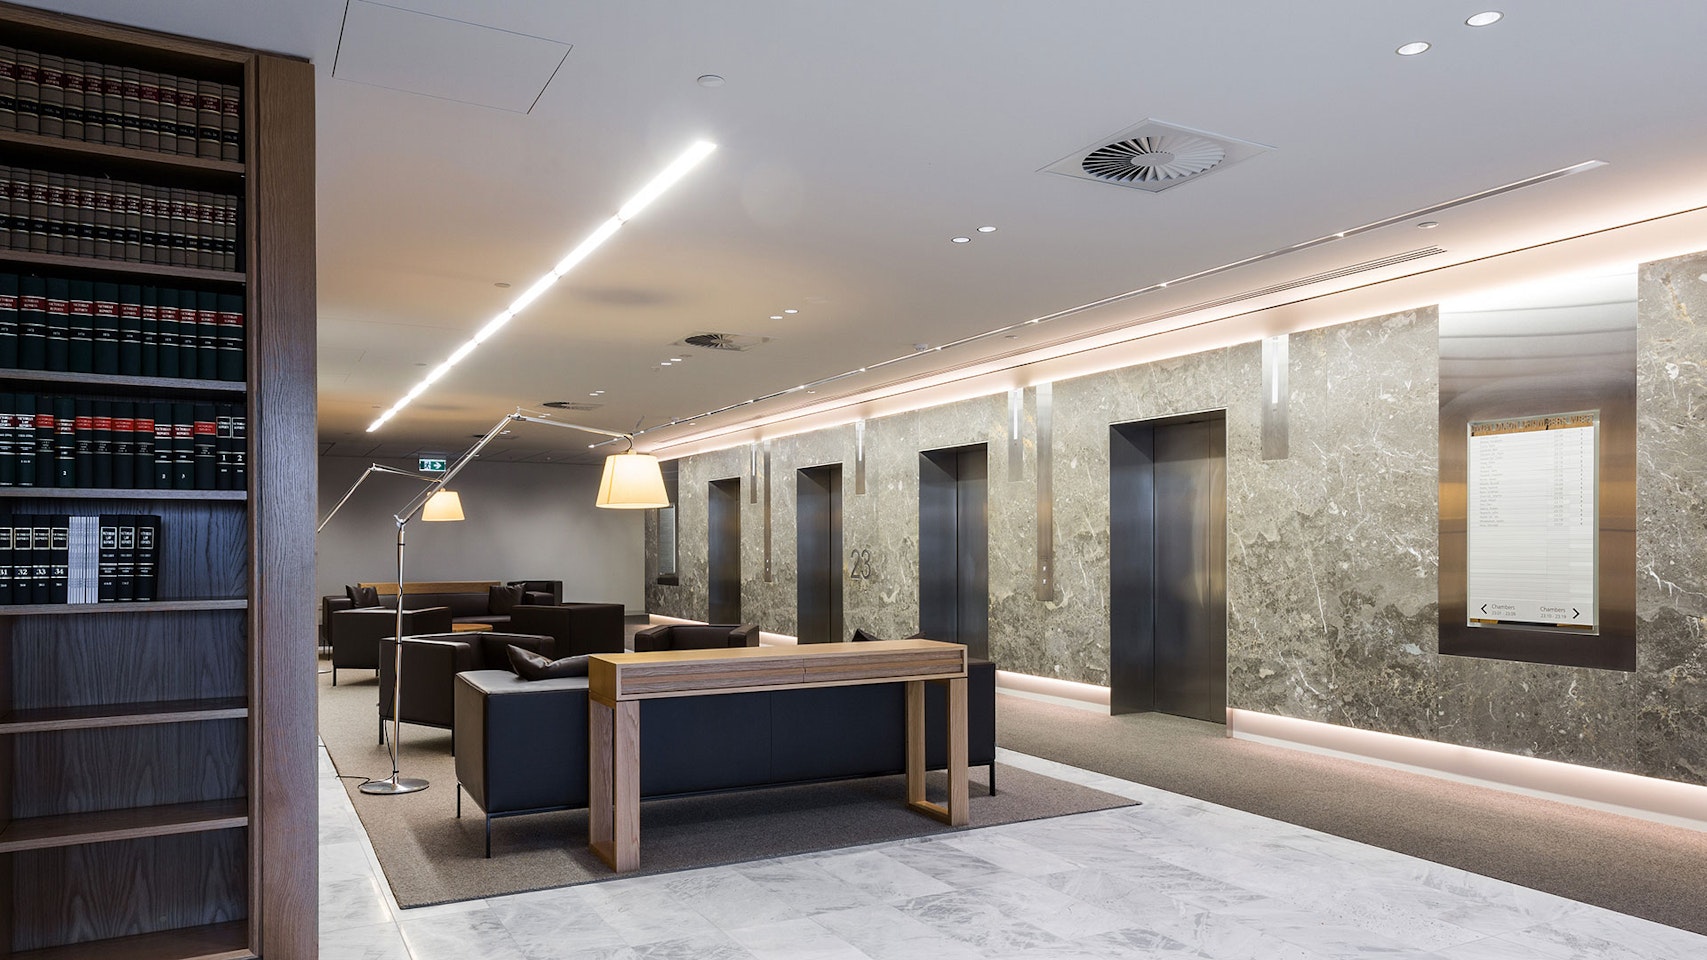 Multo LED strip in application, installed in the Owen Dixon Chambers. The clean contemporary lines were given a striking edge of even illumination using Multo in the lift lobby areas.  